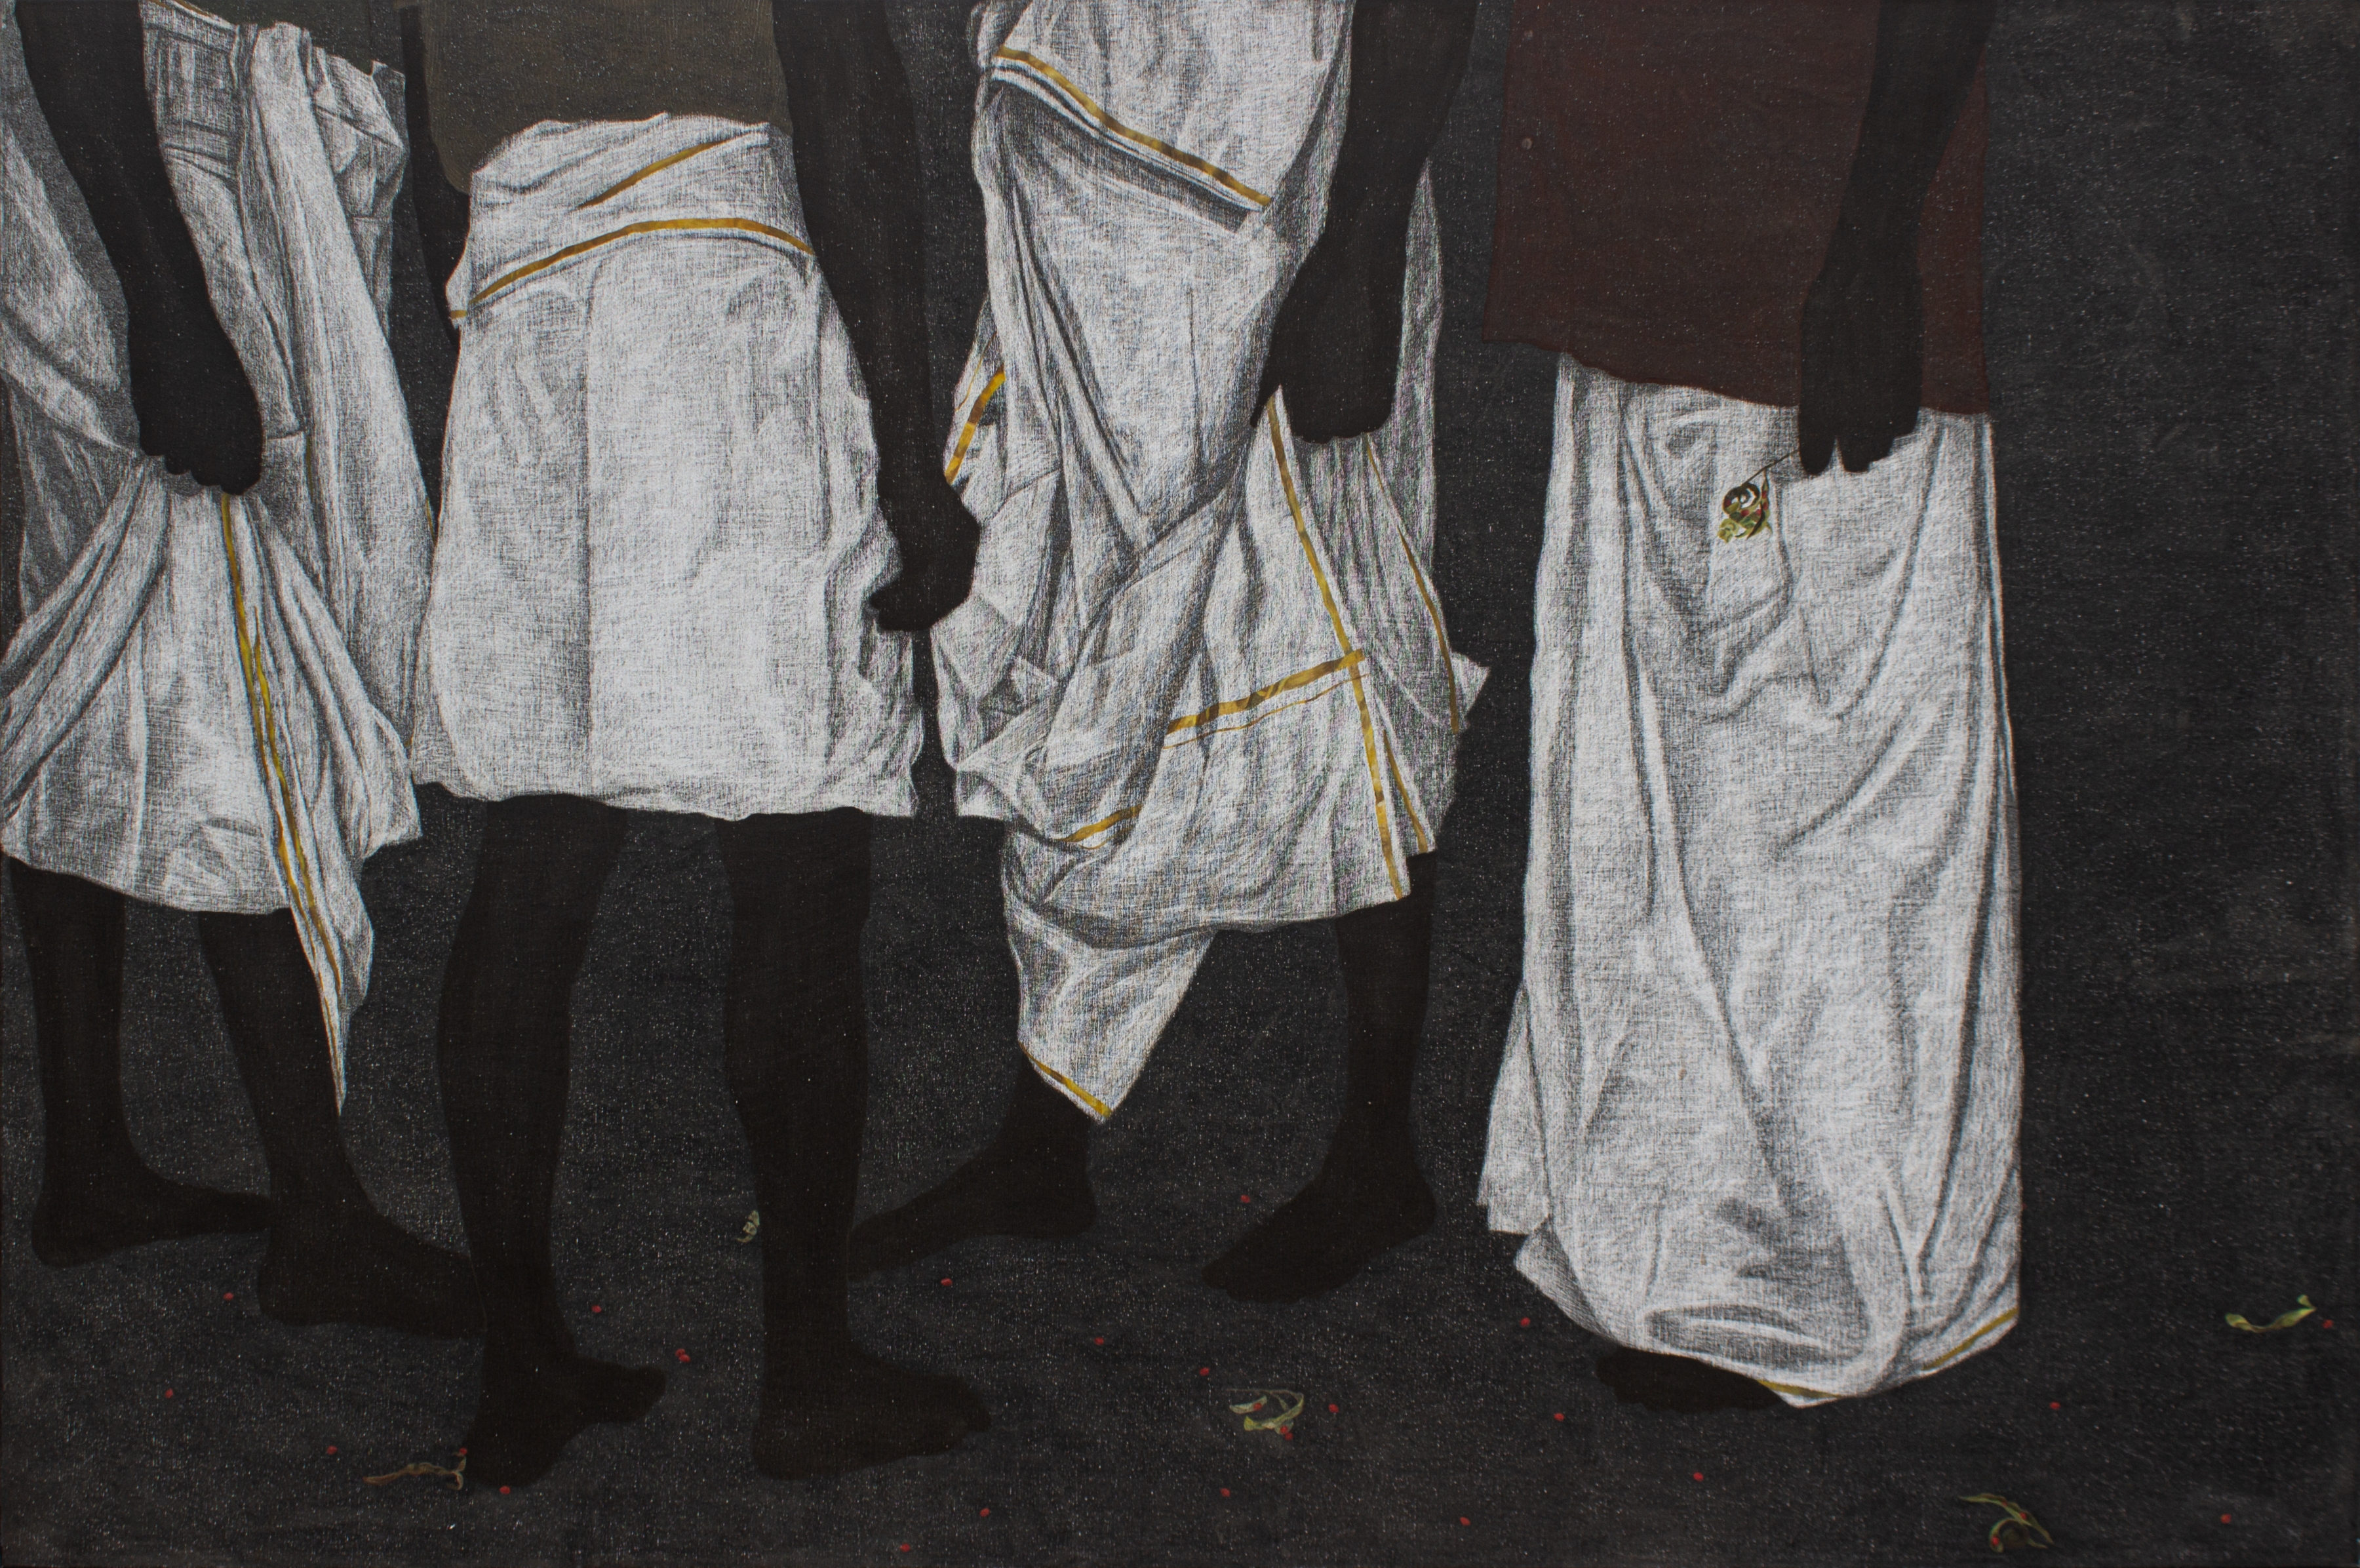 
DEVI SEETHARAM,&amp;nbsp;Manjadikuru (Lucky Red Seeds of the Coralwood Tree) &amp;mdash; From the series Brothers, Fathers and Uncles, 2020

Acrylic on canvas, 48 x 72.4 in / 122 x 184 cm
&amp;nbsp;